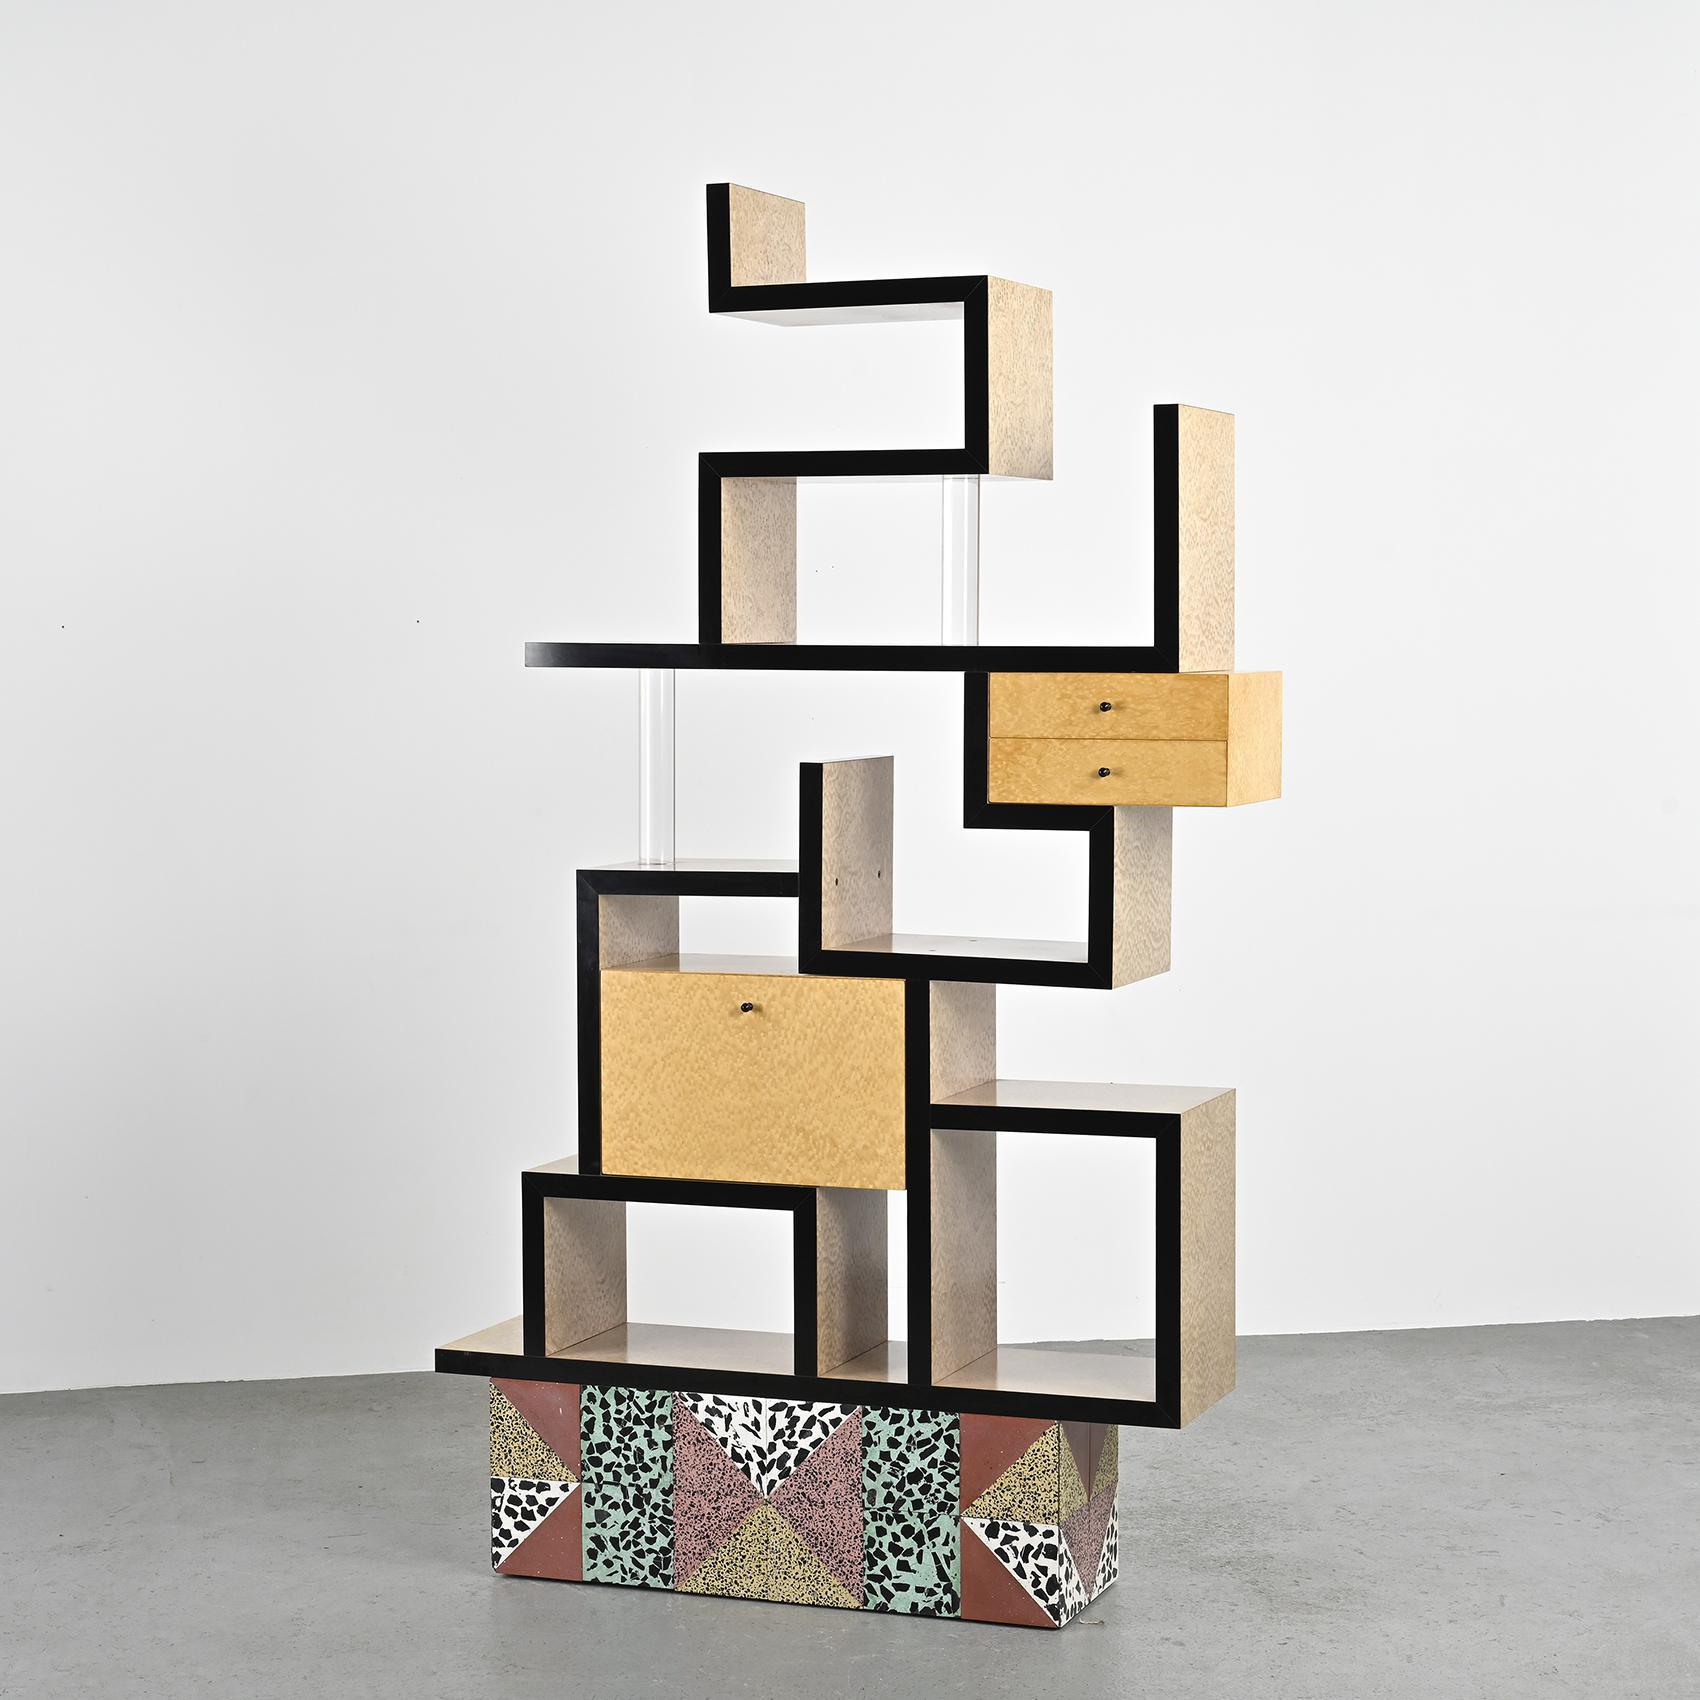 The Max bookcase by Ettore Sottsass, created by the famous Italian designer, is an iconic piece that reflects his distinct aesthetic. Designed in the 1980s, this bookcase is characterized by a bold and colorful structure, typical of the Memphis